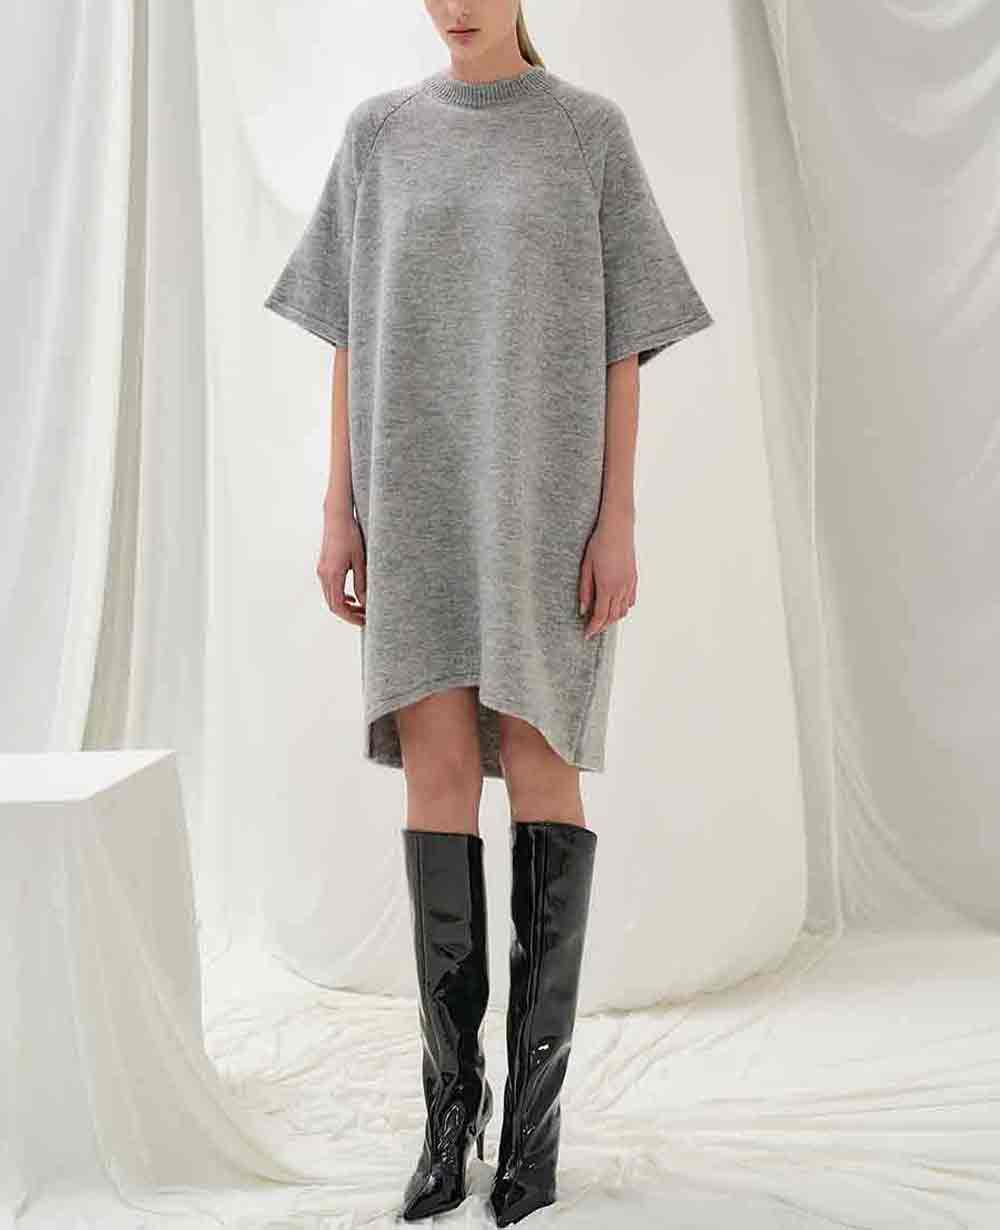 RELAXED SWEATER DRESS "LISA"